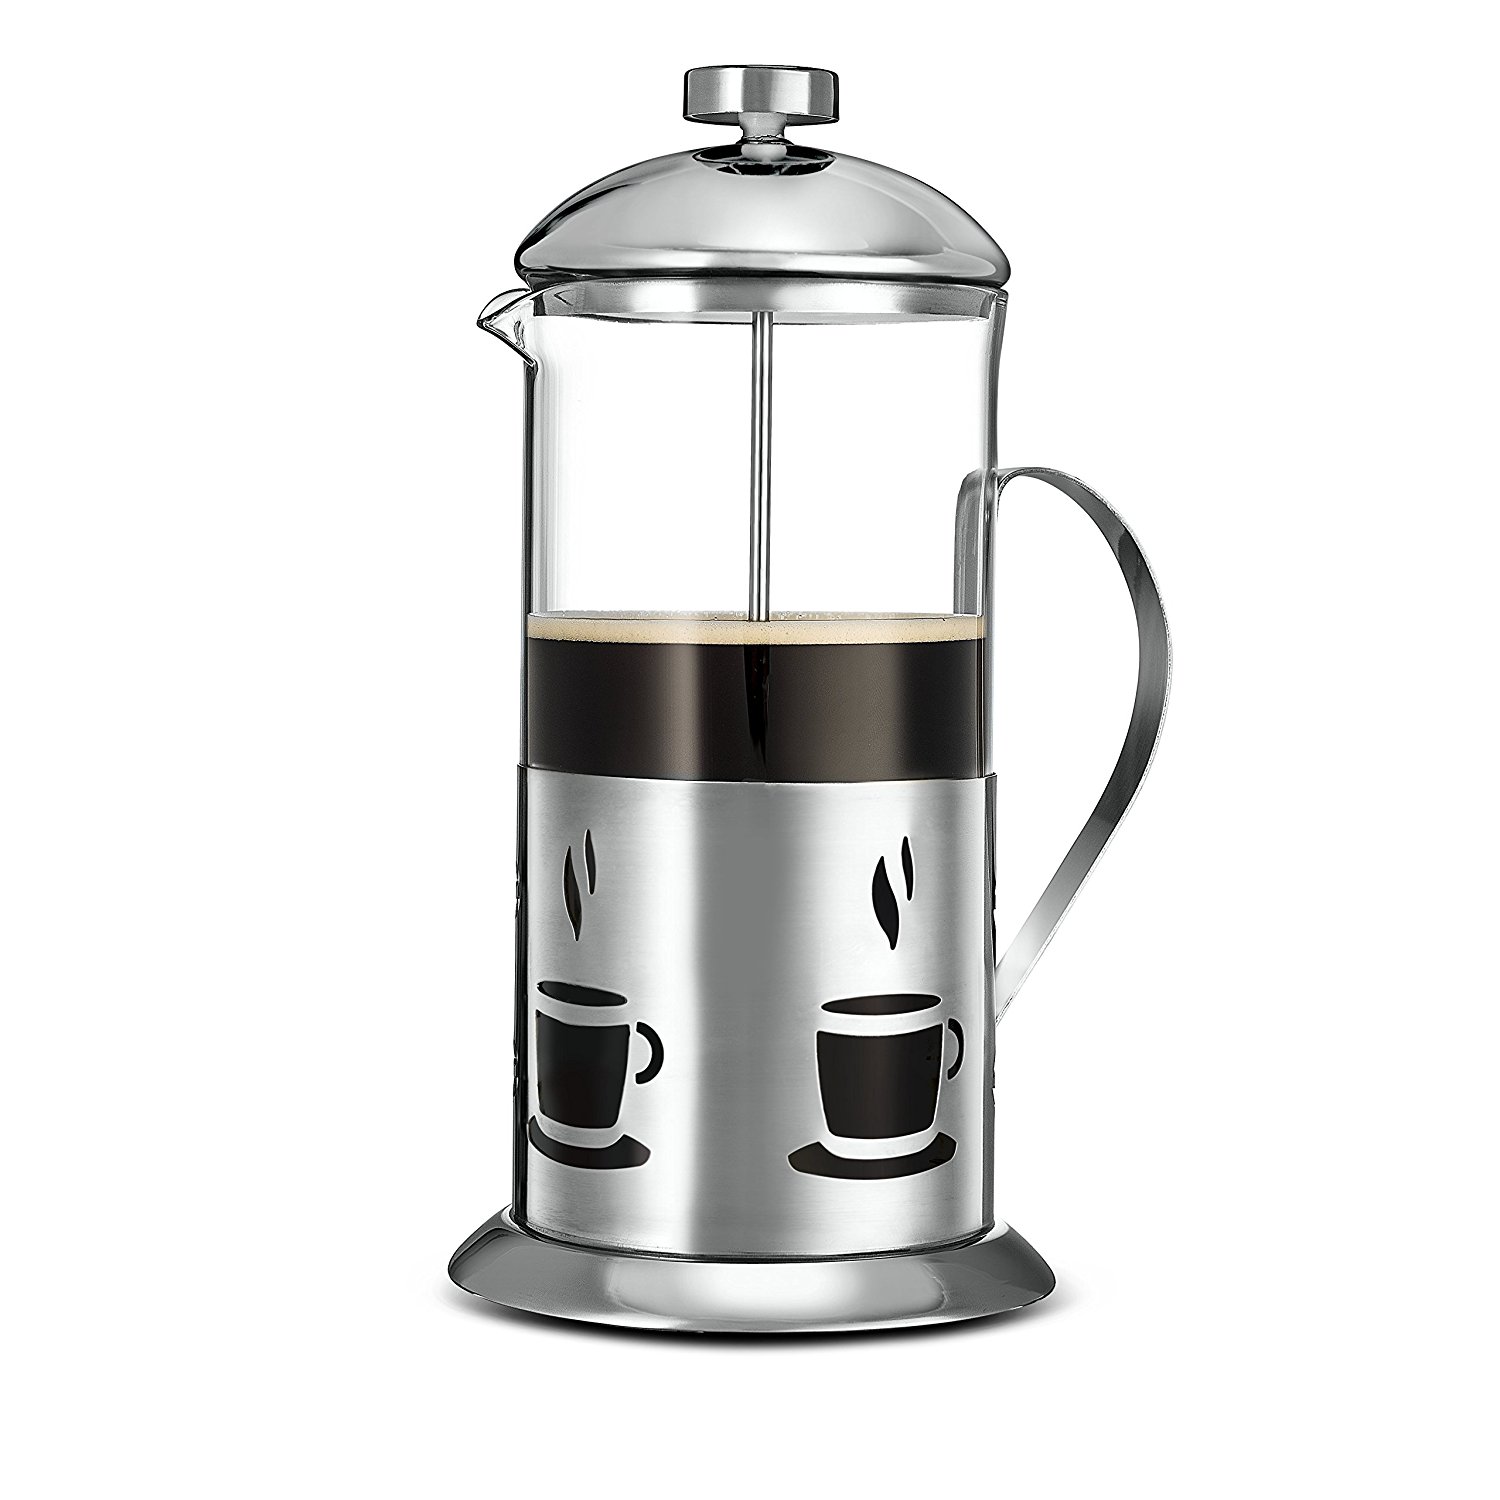 Kitchsmart Stainless Steel French Press Double Screen Filtering